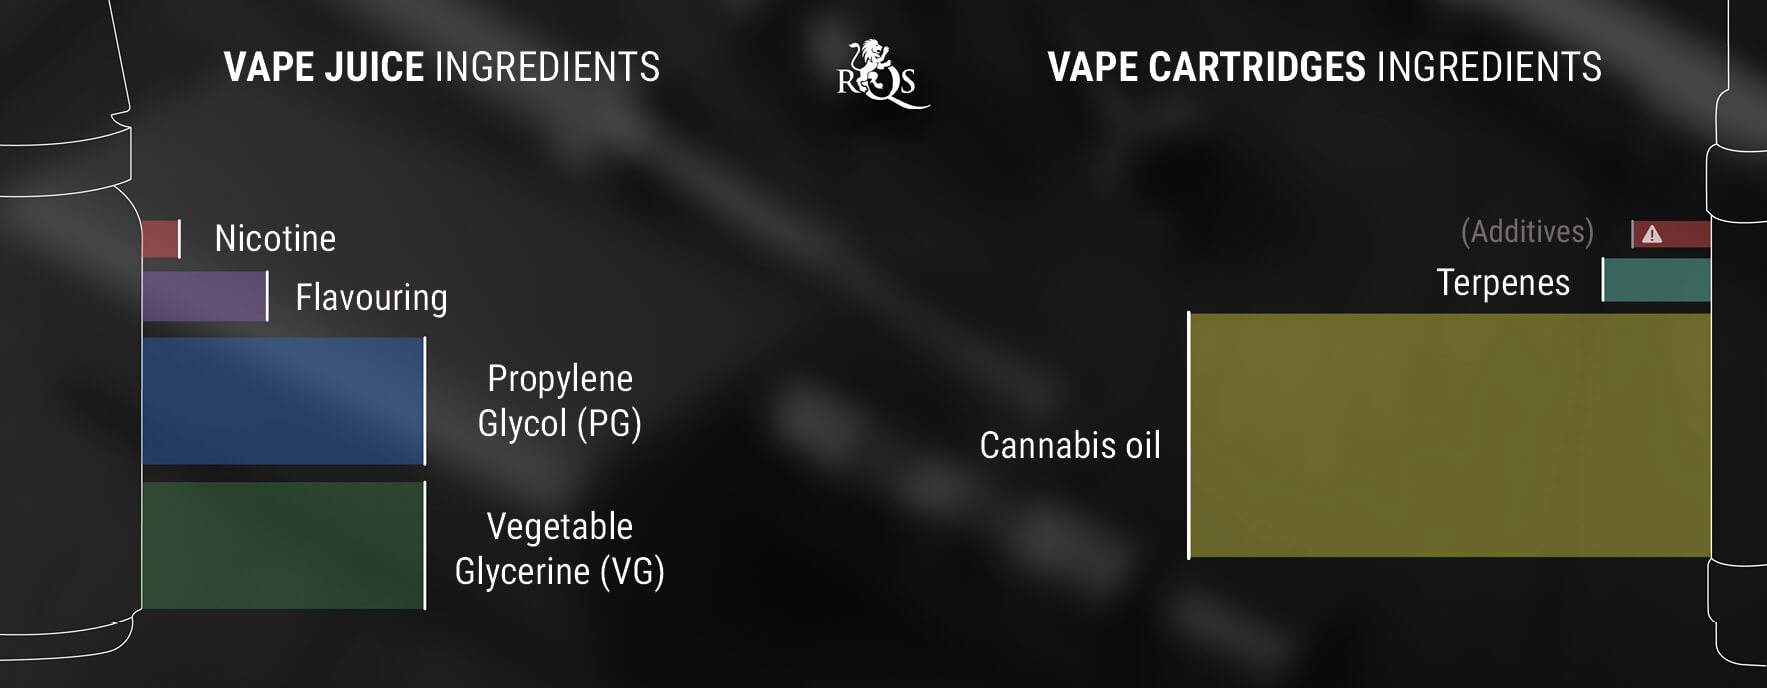 THC and CBD Vape Juice vs Cartridges: What’s the Difference?